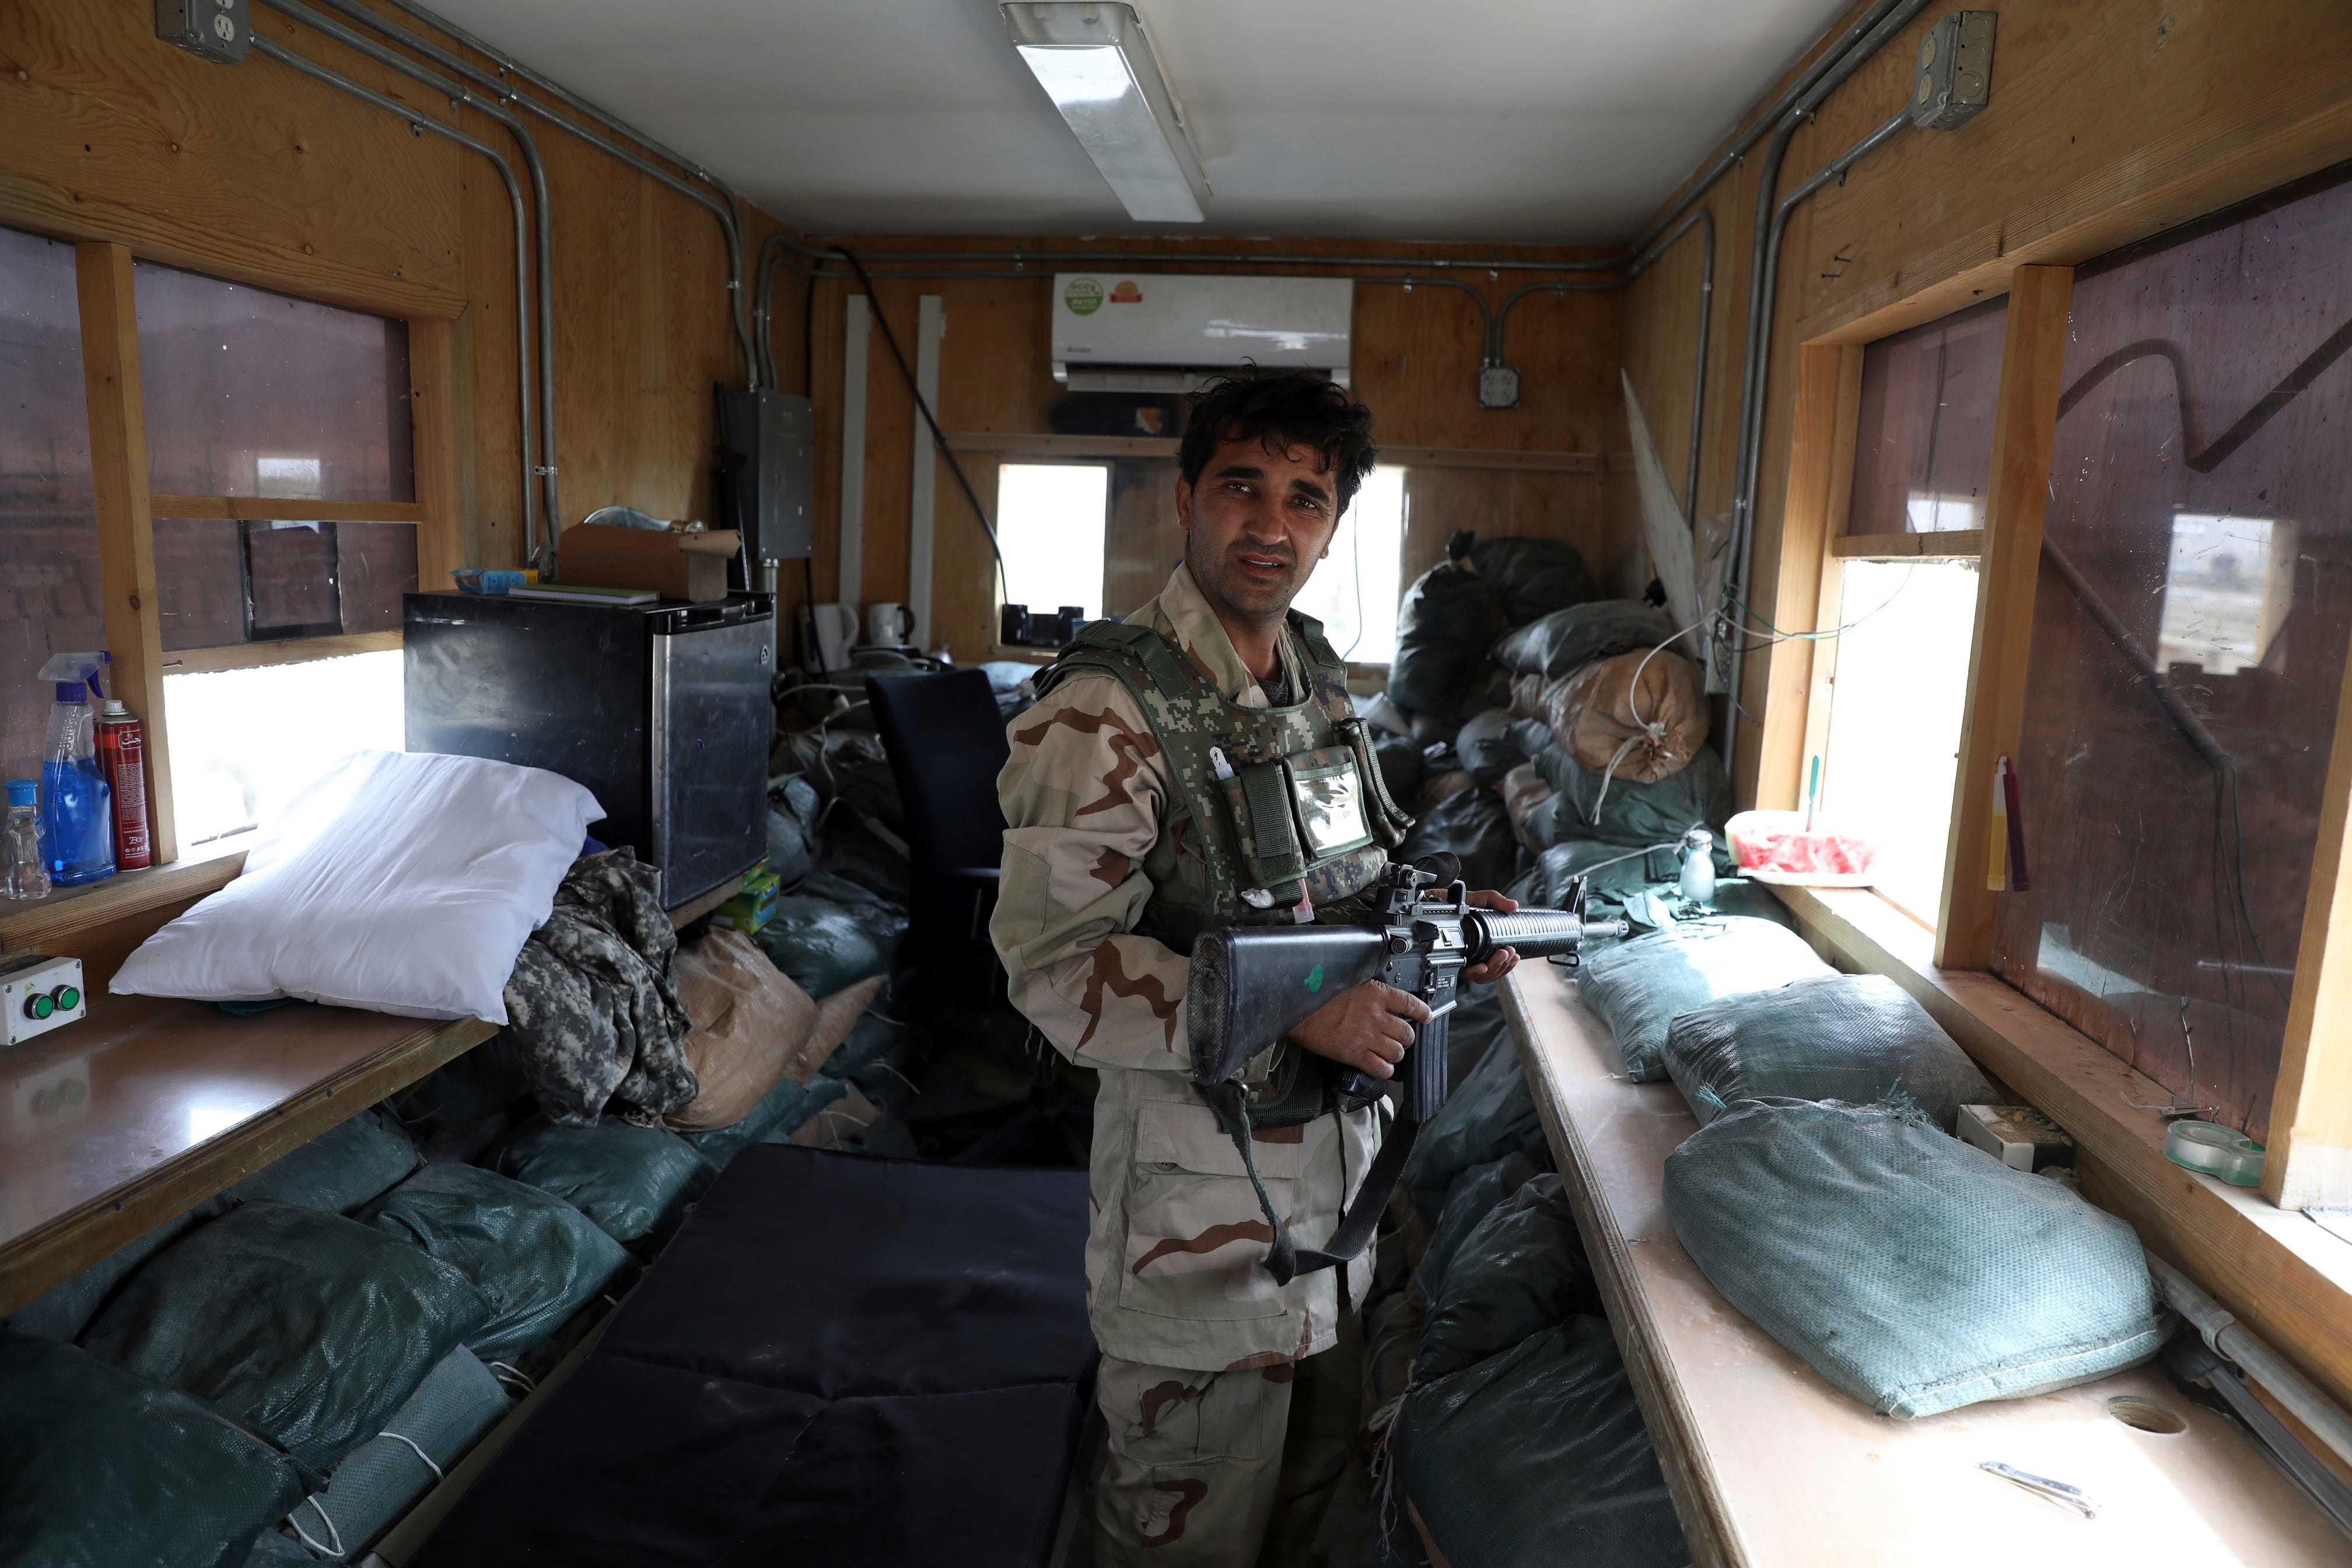 An Afghan security forces member holding a firearm and standing among items like pillows and bags left behind by US troops.